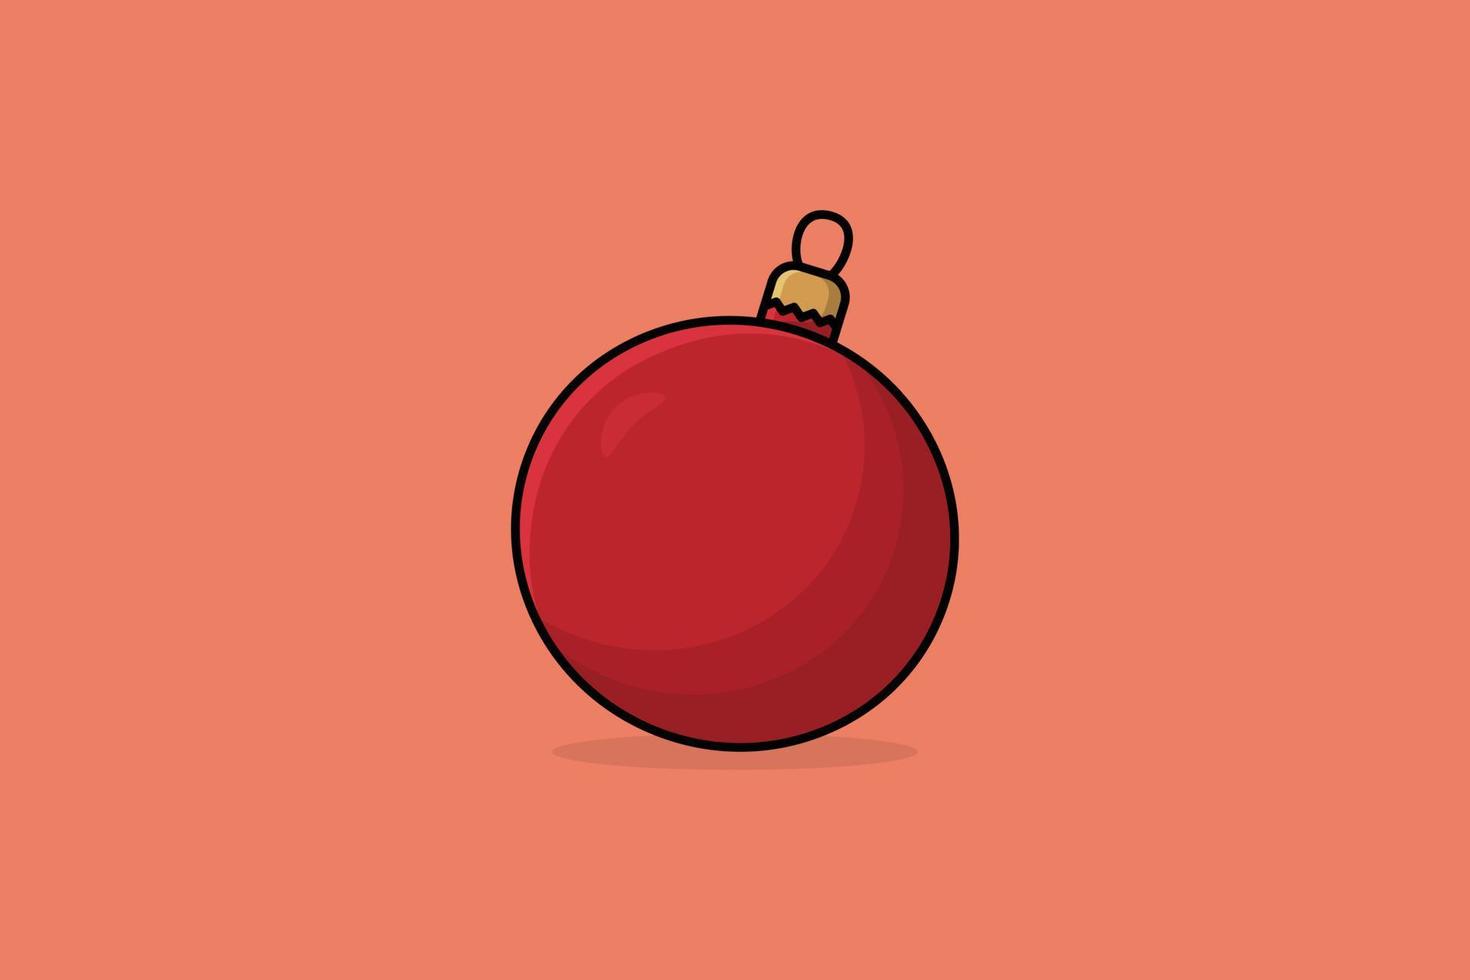 Christmas ball vector icon illustration. Food nature icon design concept. Red color round fruit logo design.